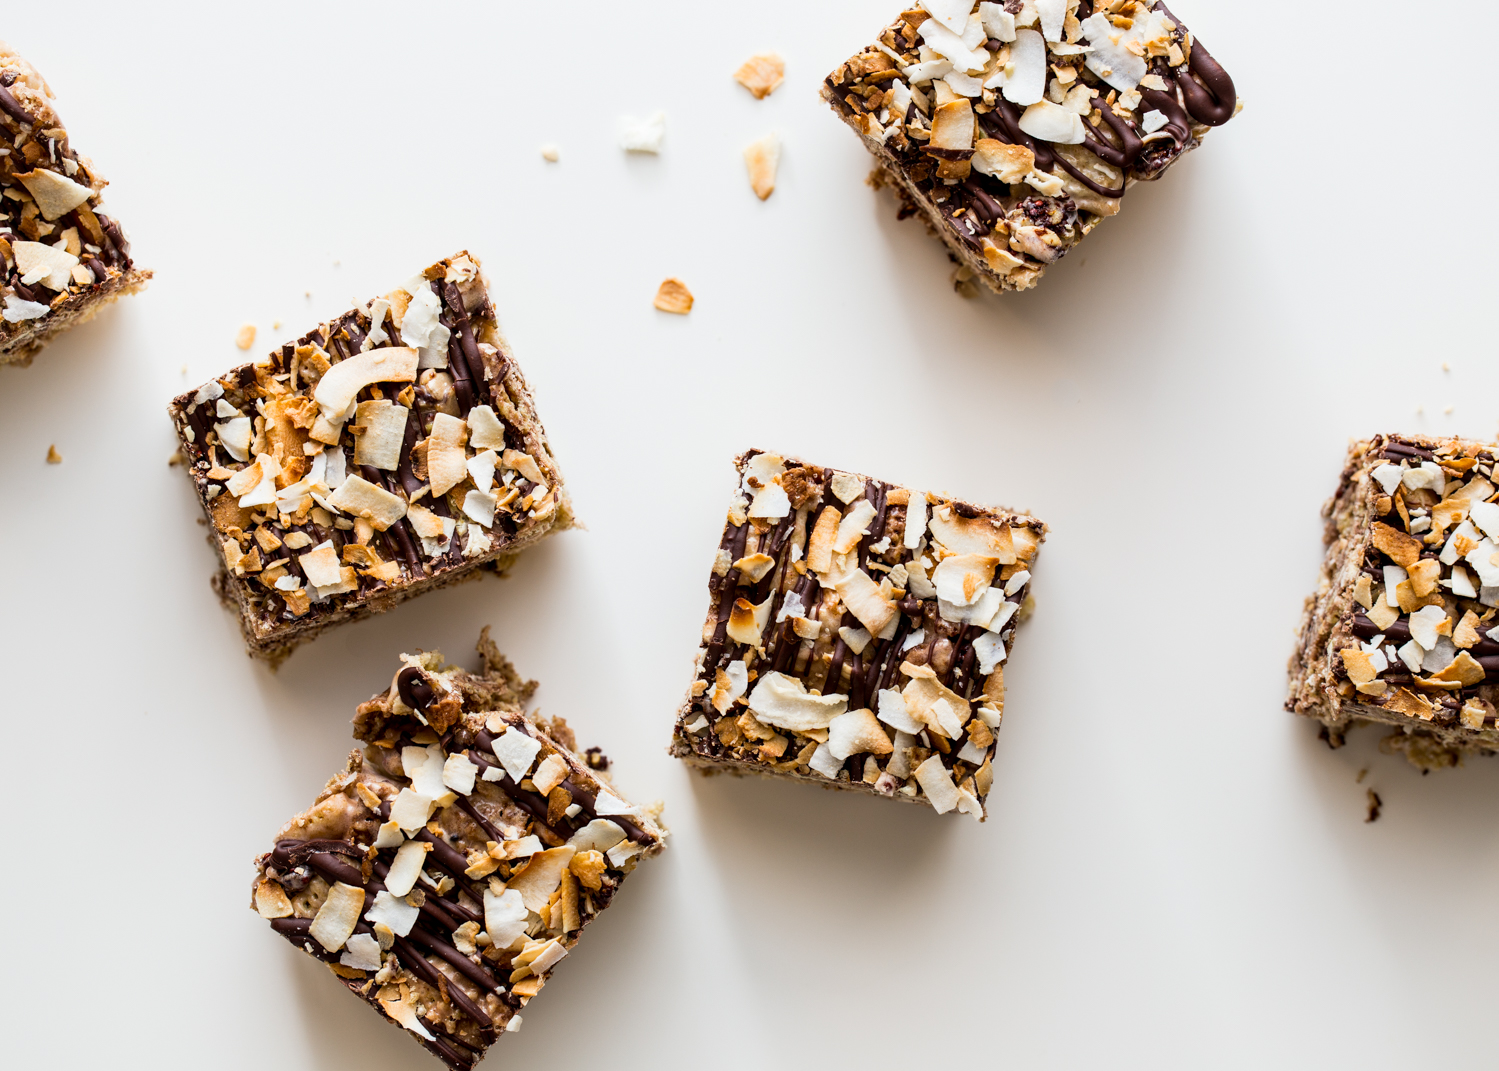 Chocolate Coconut Marshmallow Treats have a surprise ingredient of granola!